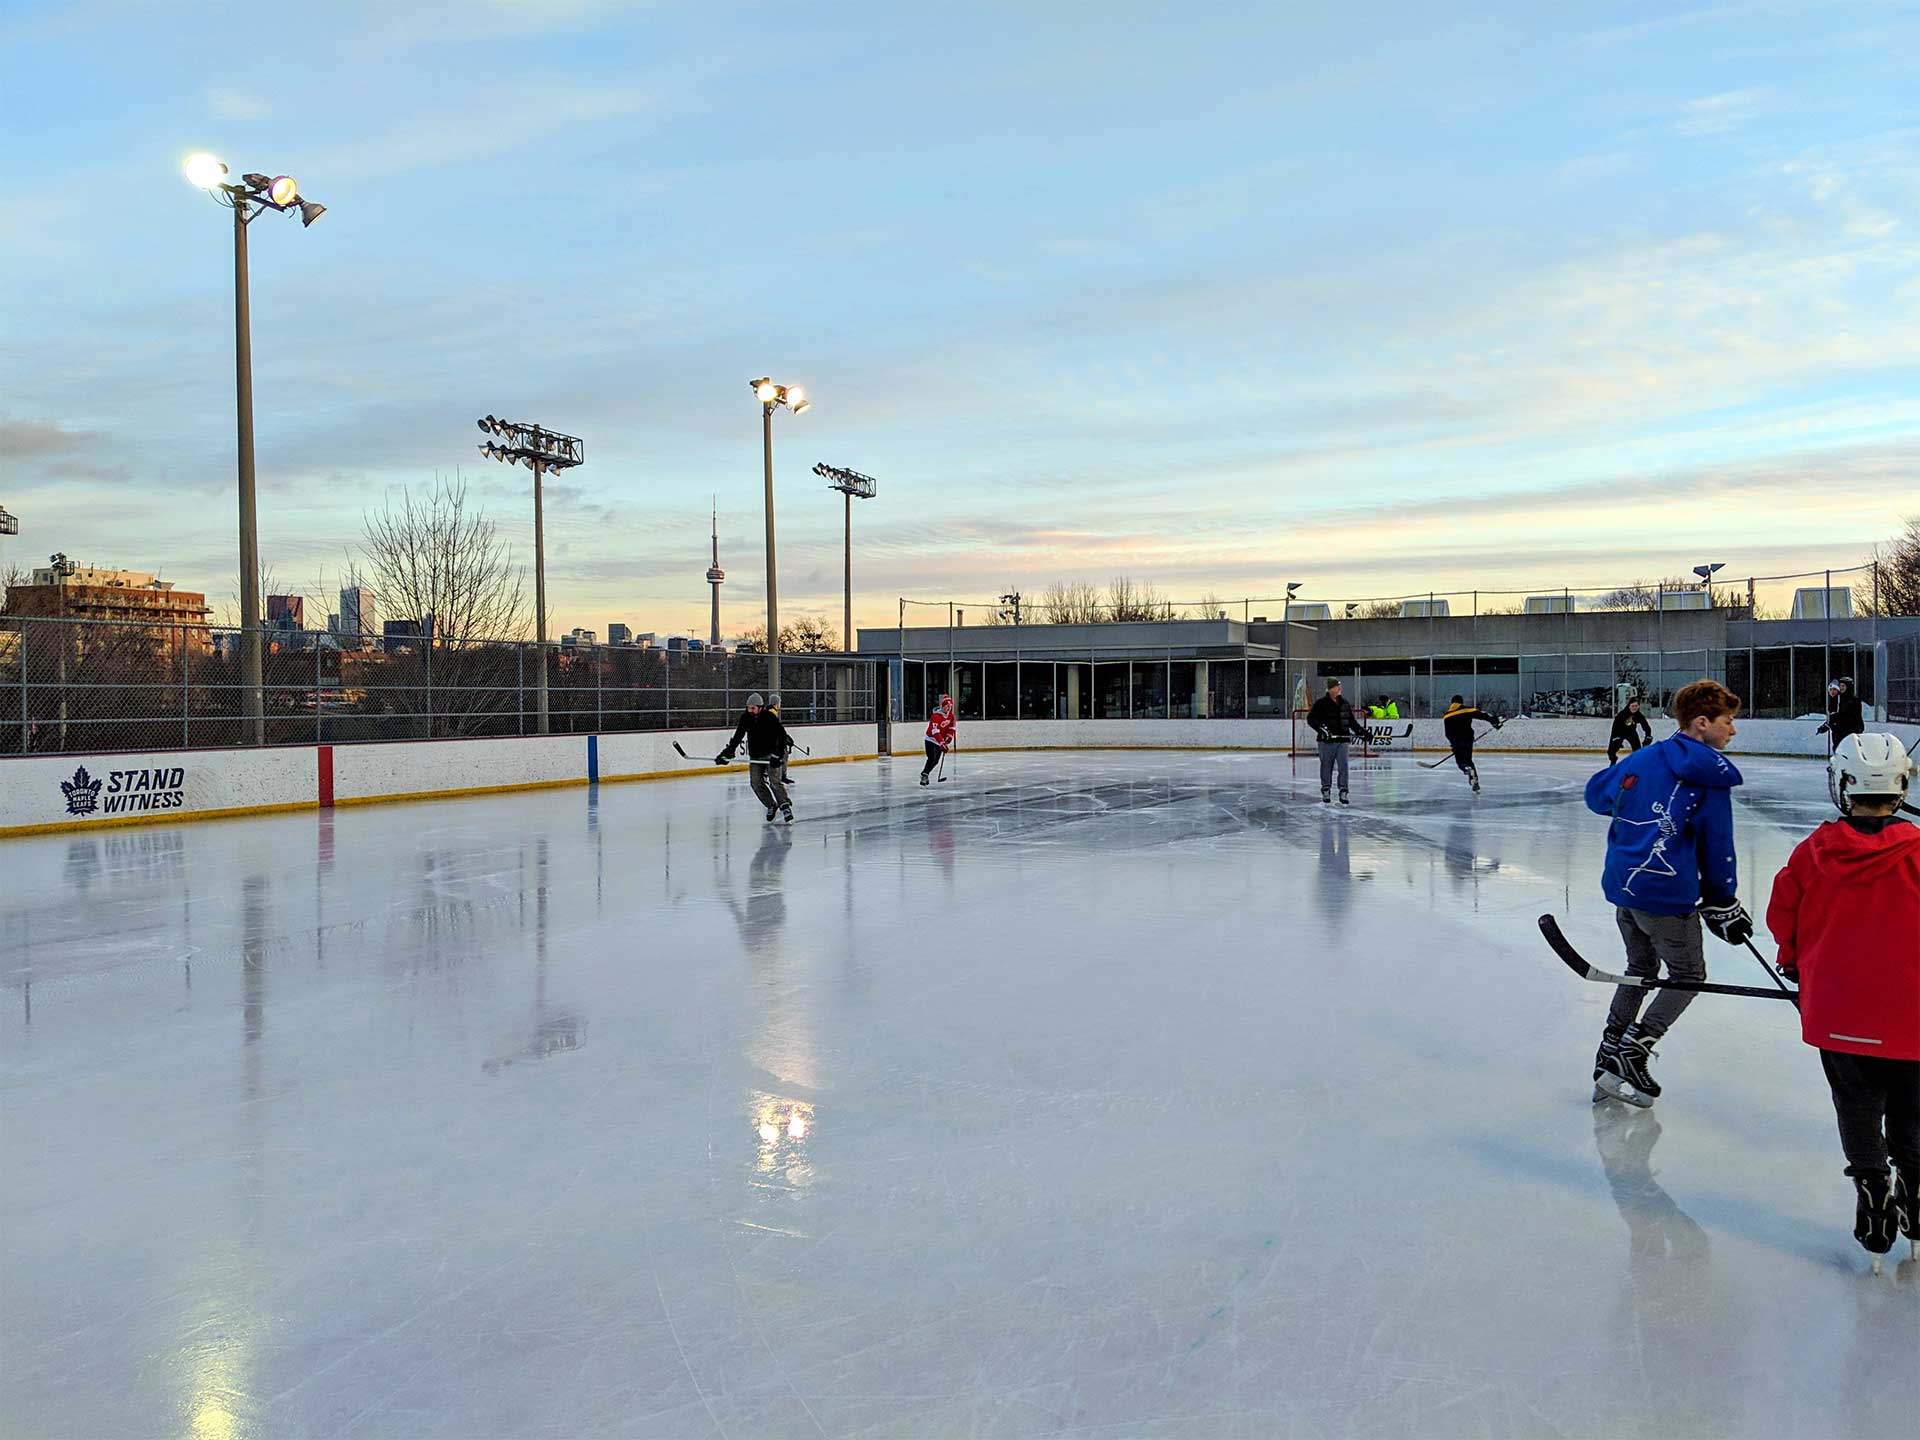 Shinny in Christie Pits Park